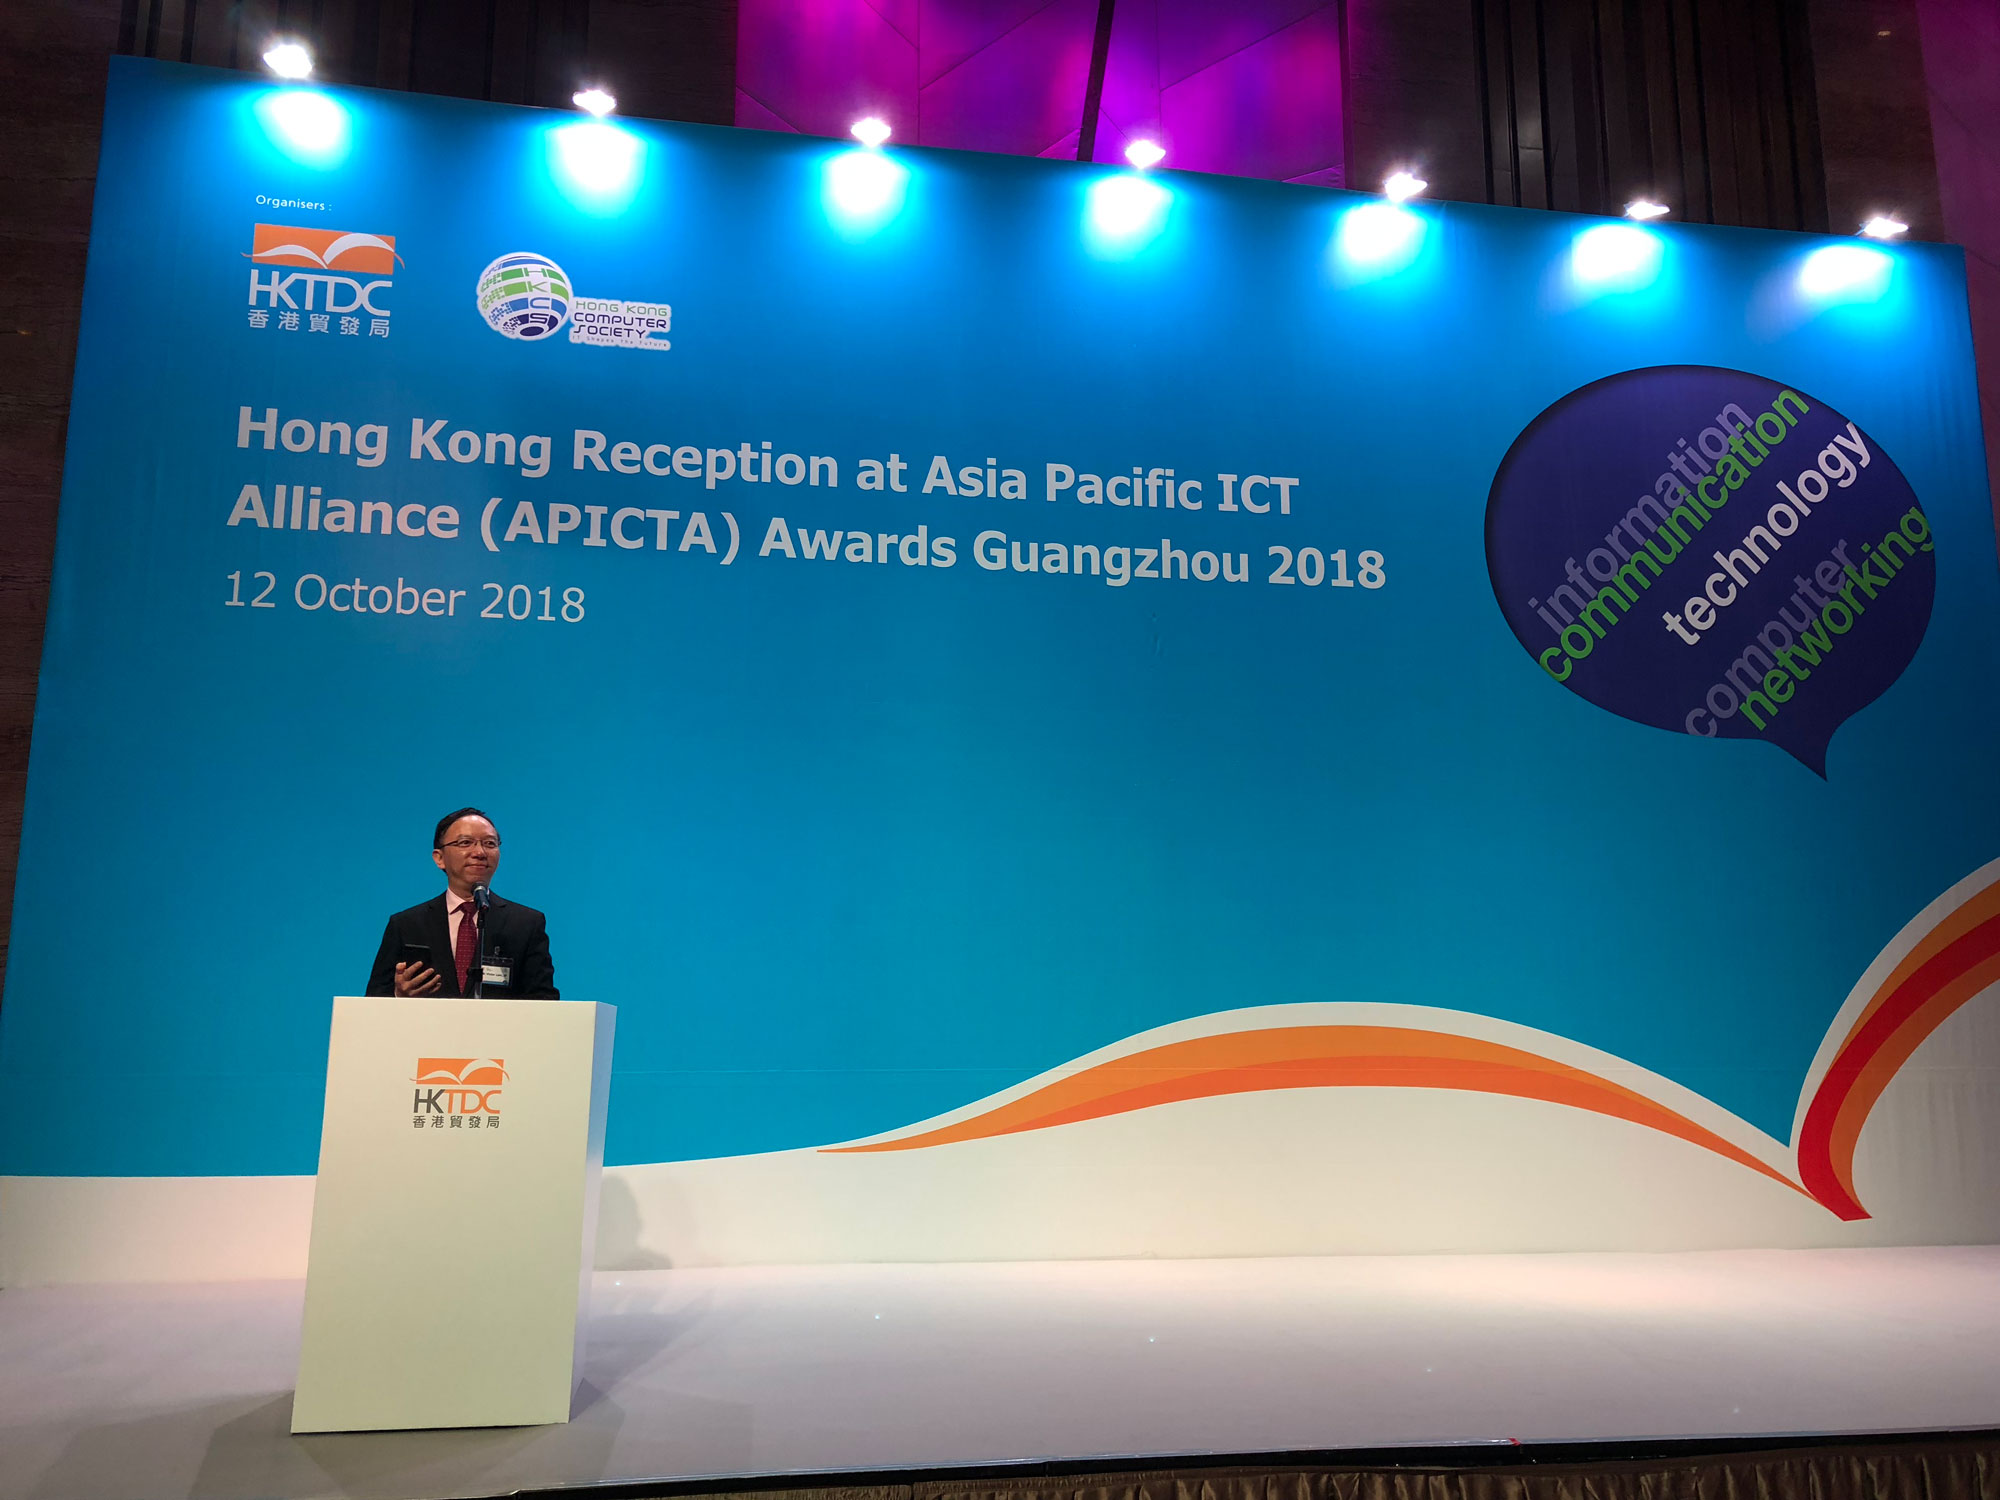 Mr. Victor Lam, Government Chief Information Officer, delivers Opening Speech at the "Hong Kong Reception at Asia Pacific ICT Alliance (APICTA) Awards Guangzhou 2018".